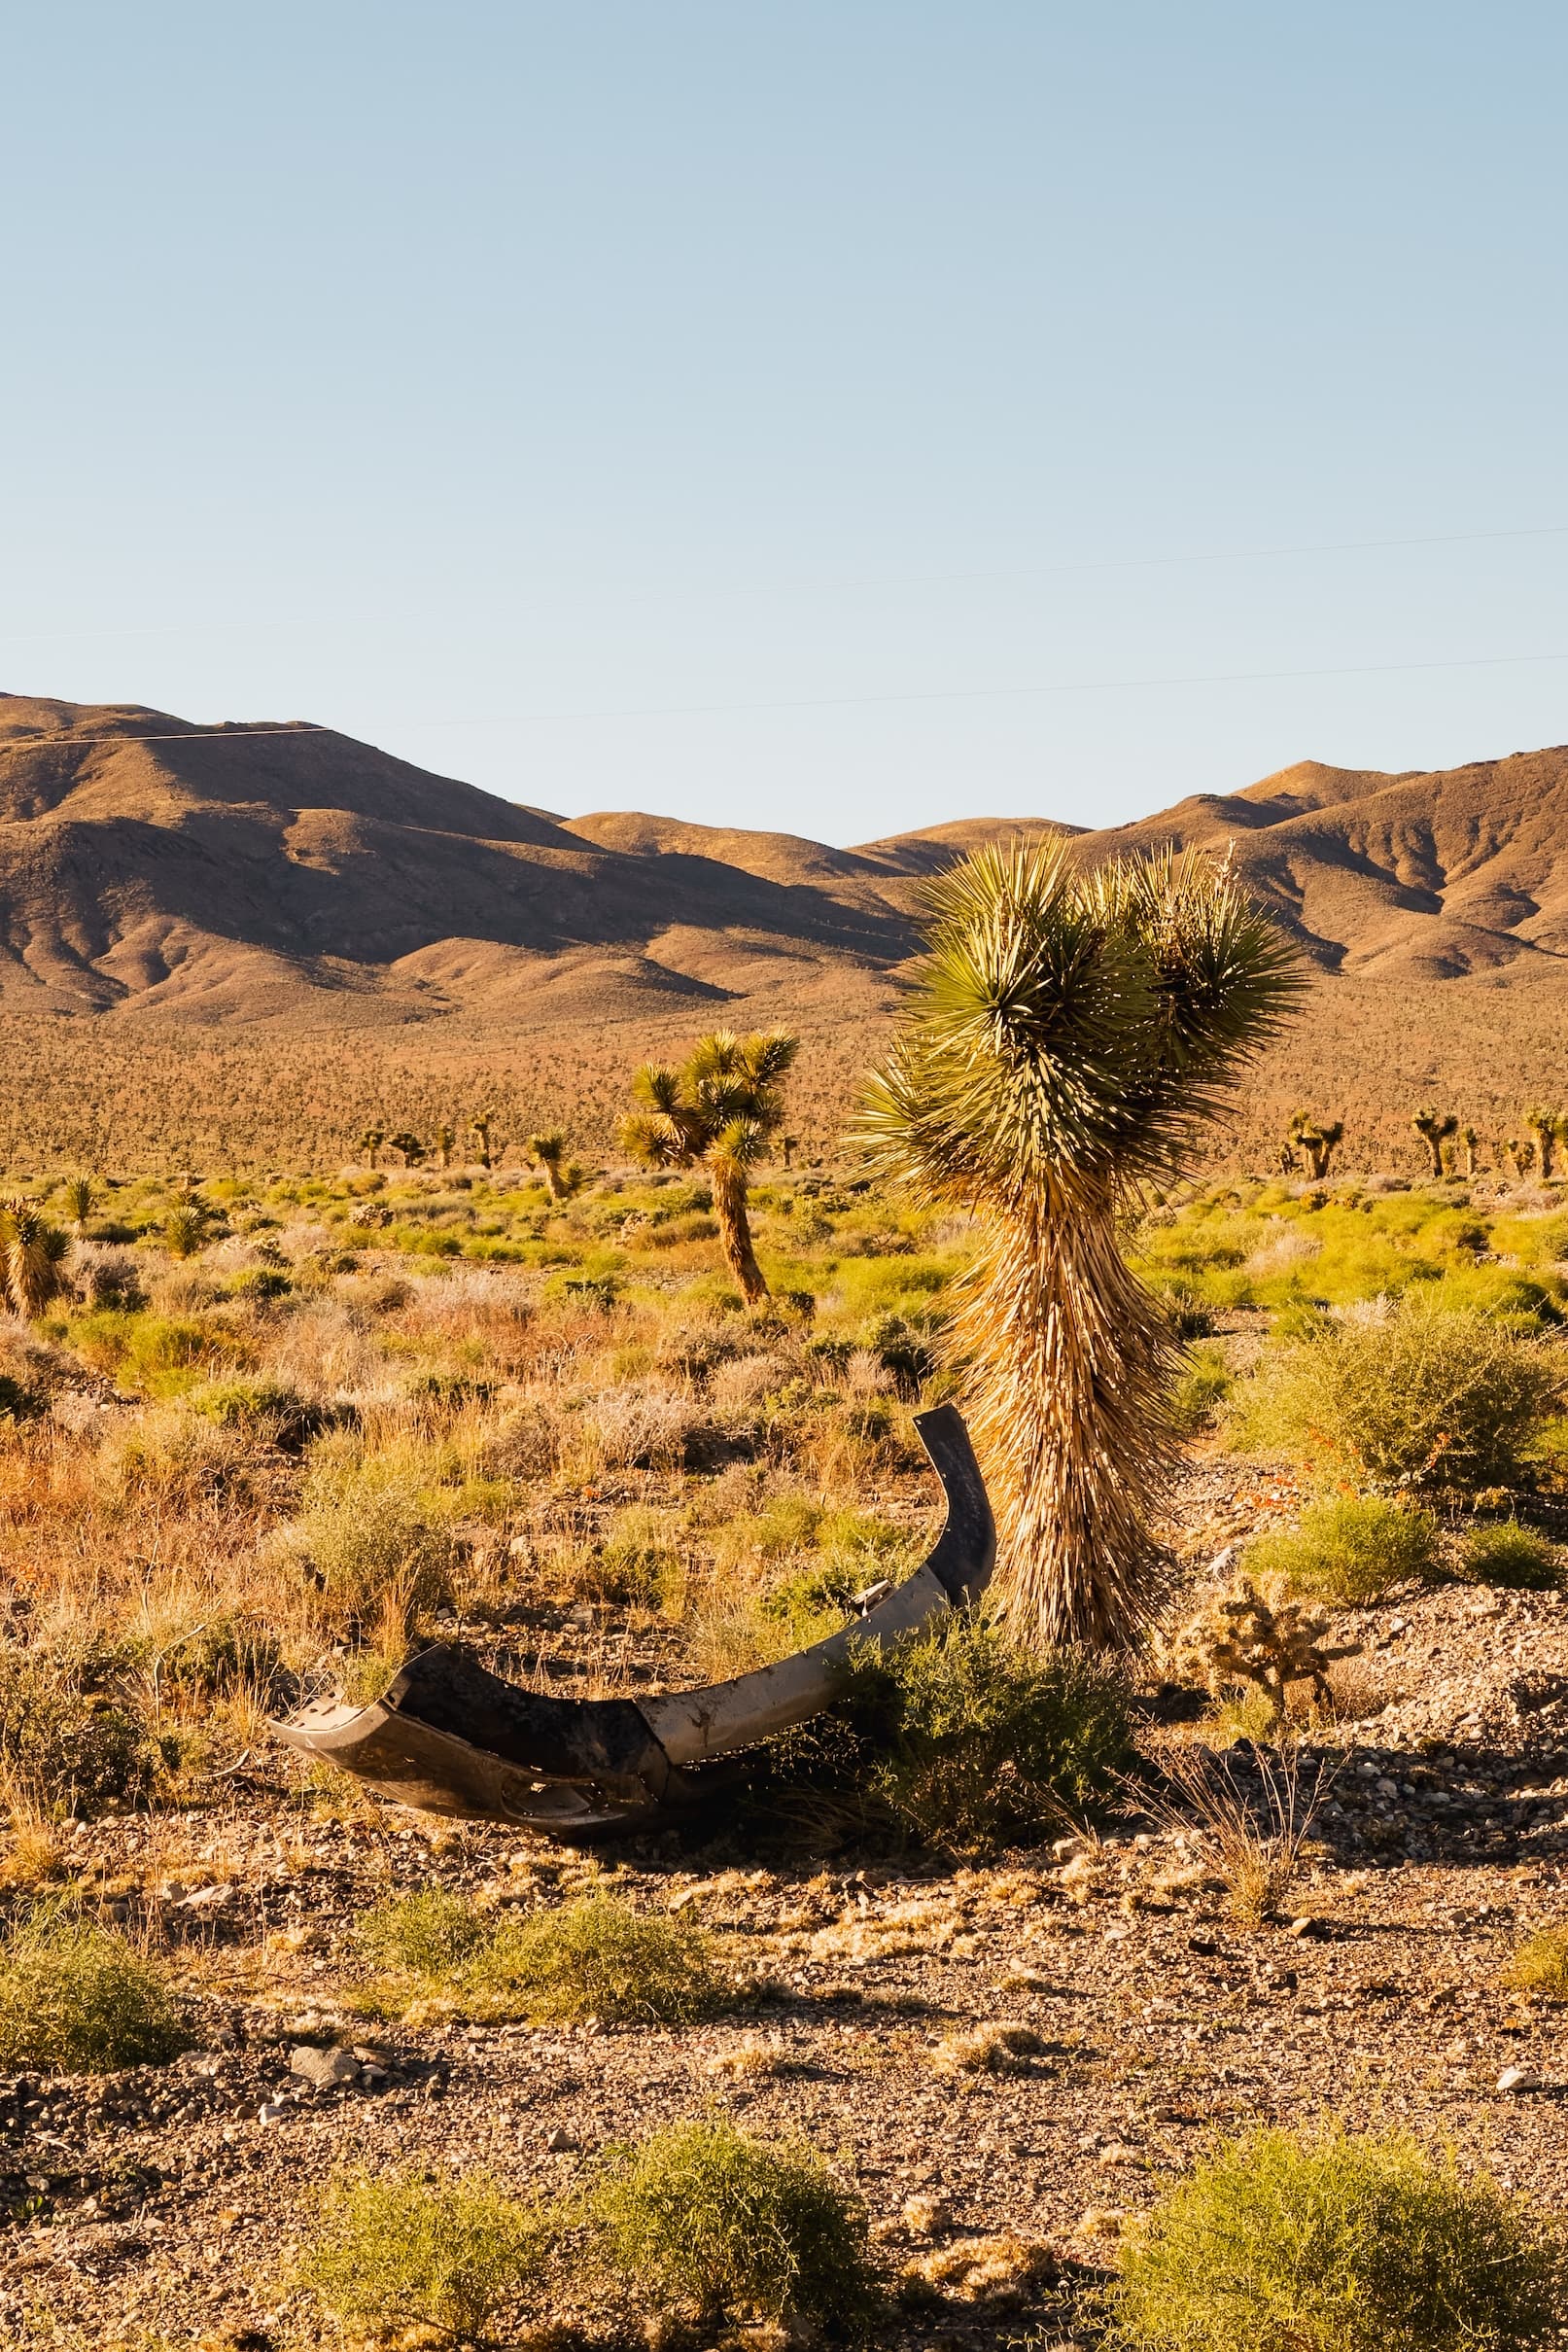 A desert scene with a broken off car bumper, Joshua tree in the foreground and rolling hills in the background under a clear blue sky.